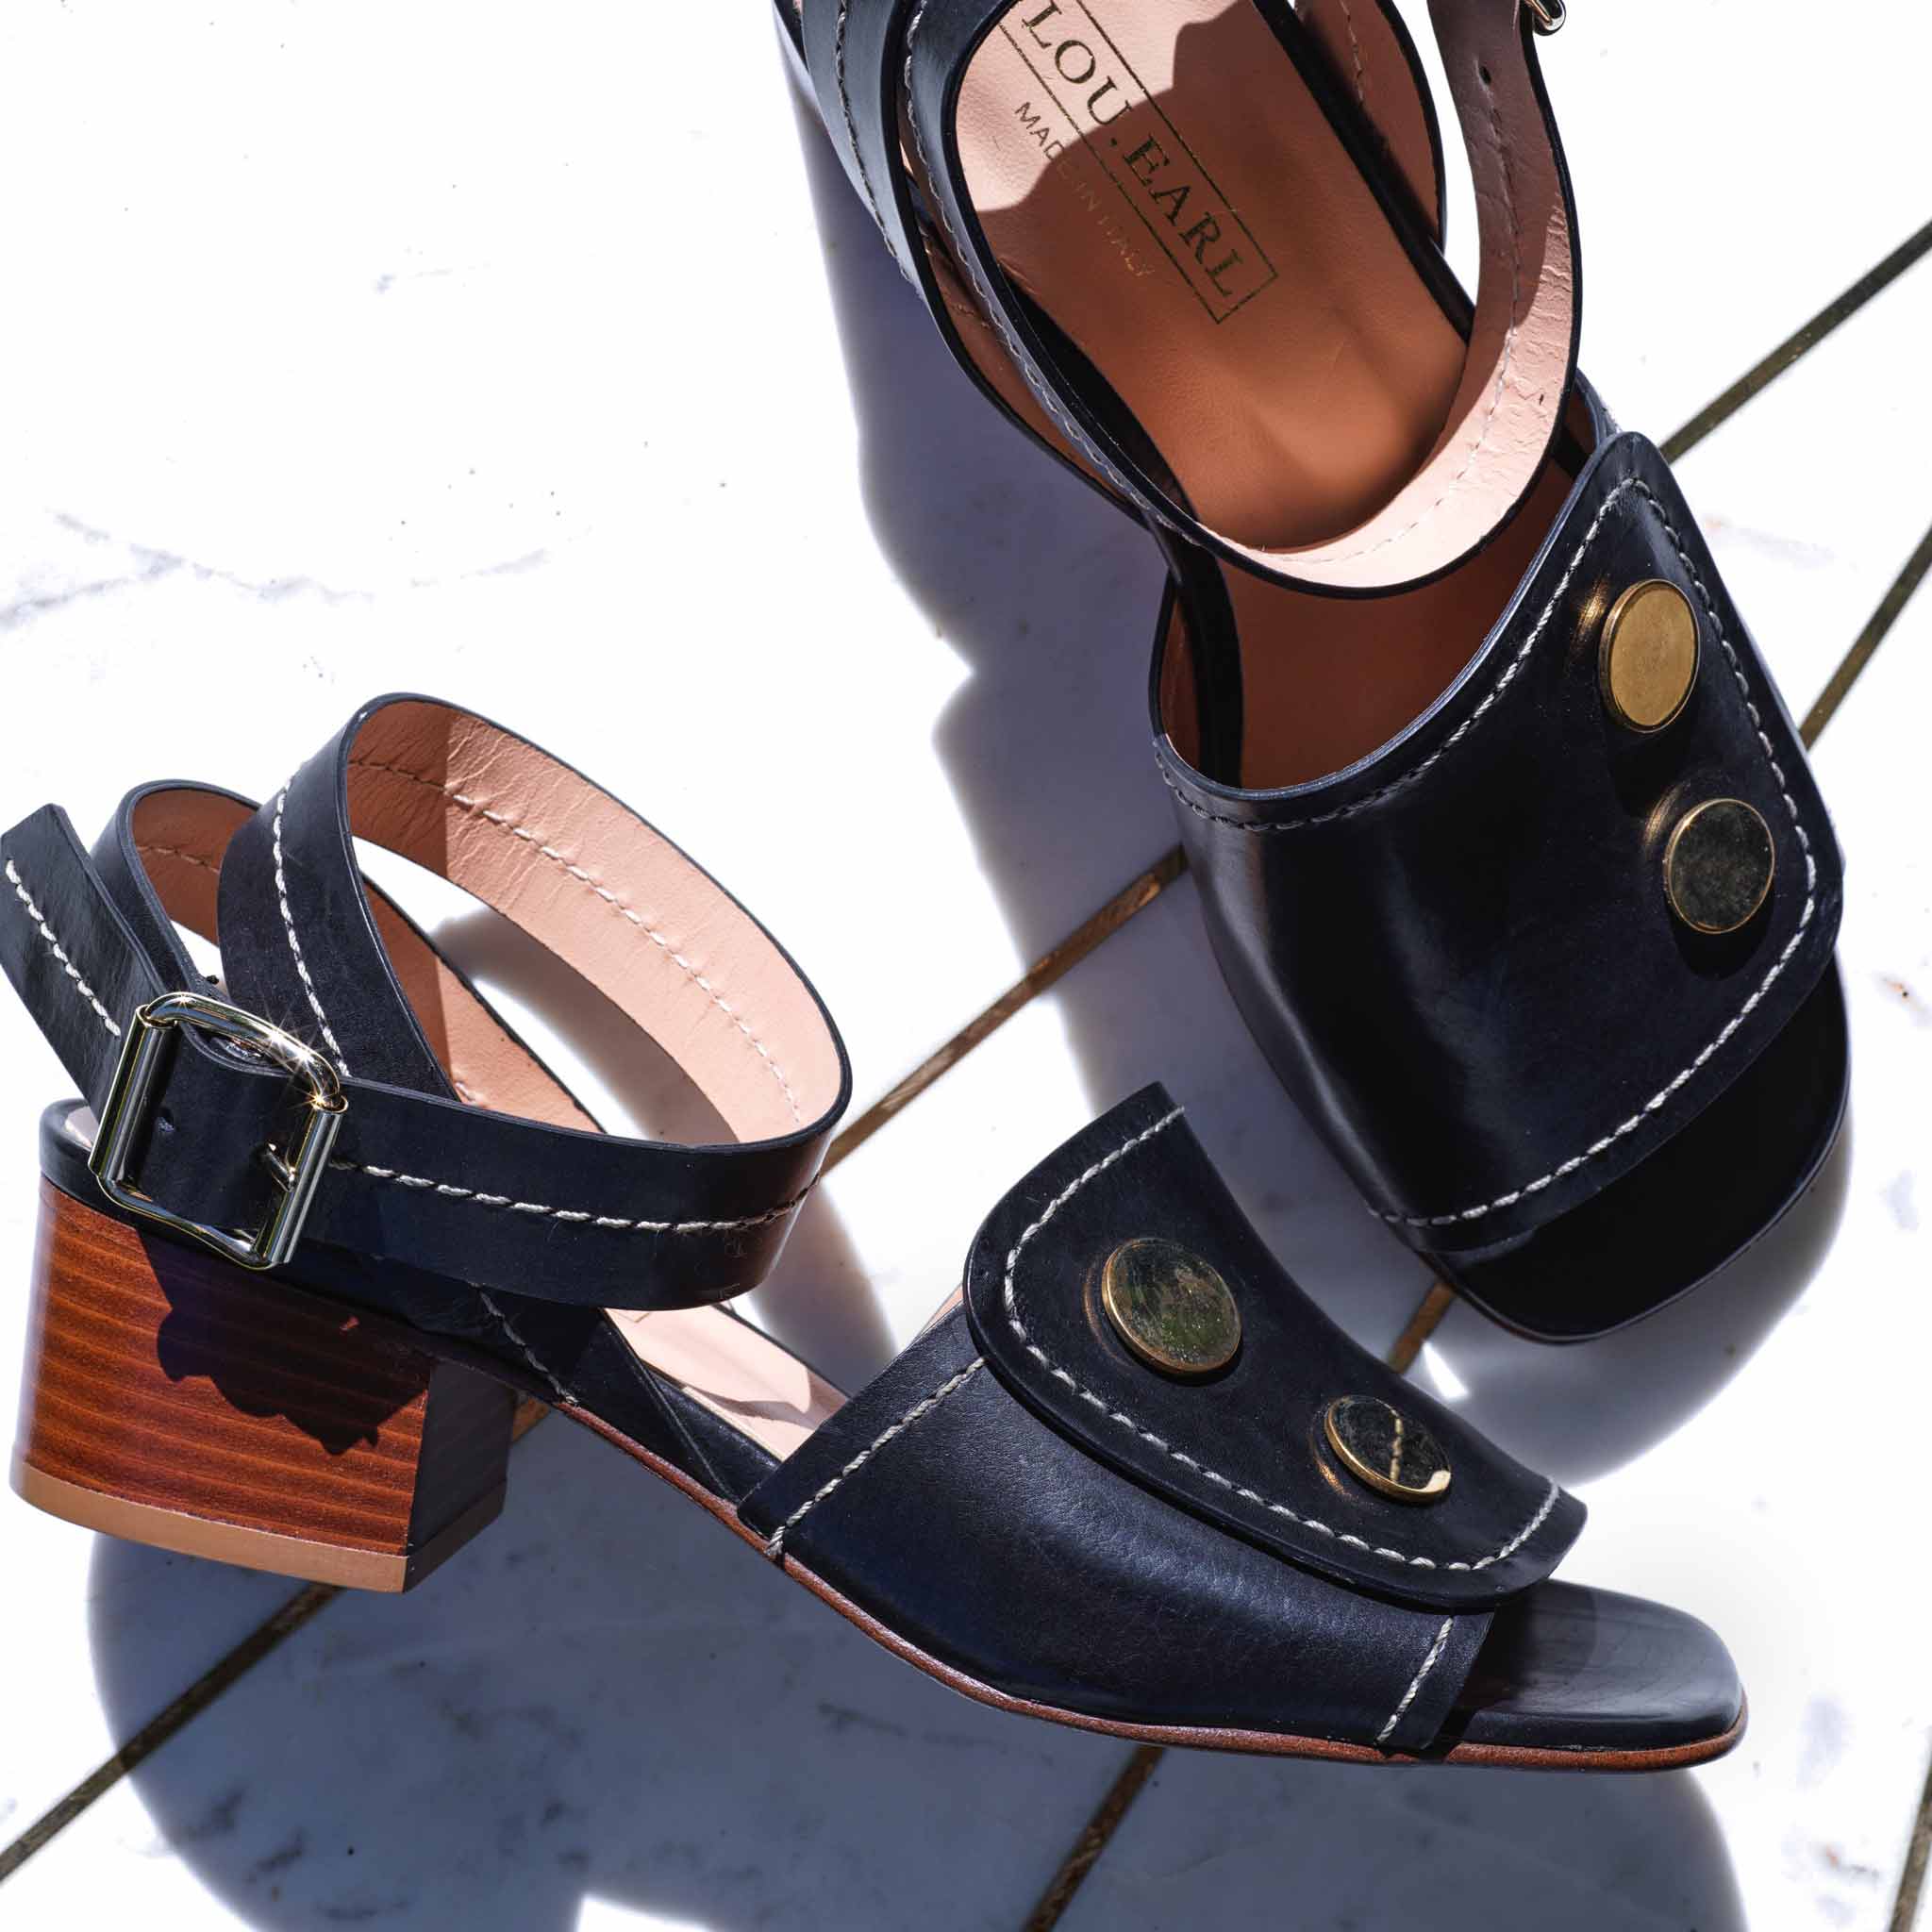 blocky heels with black leather and large round oversized metal studs with white stitching and ankle strap. italian open toe sandals sitting as a pair on marble background.